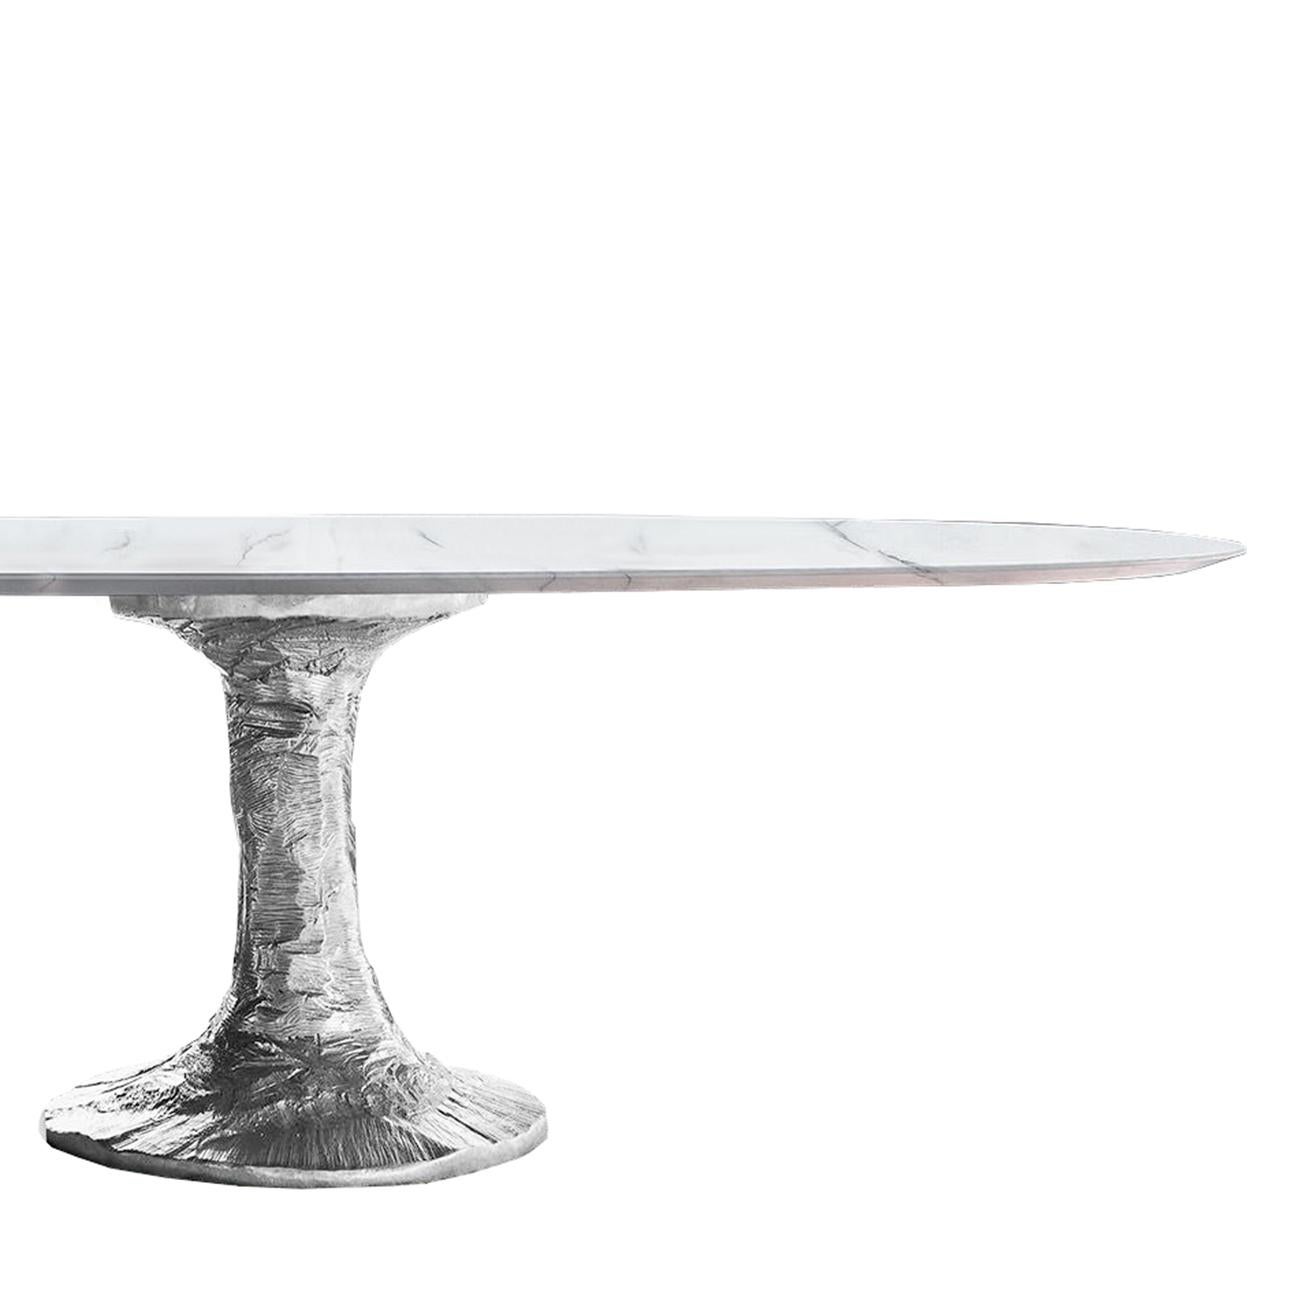 Table Perenza oval with white carrara marble top,
reinforced with metal frame below. On casted aluminium
base. Base diameter: 68cm.
Also available in L 200 x D 105 x H7 5cm, price: 10900,00€.